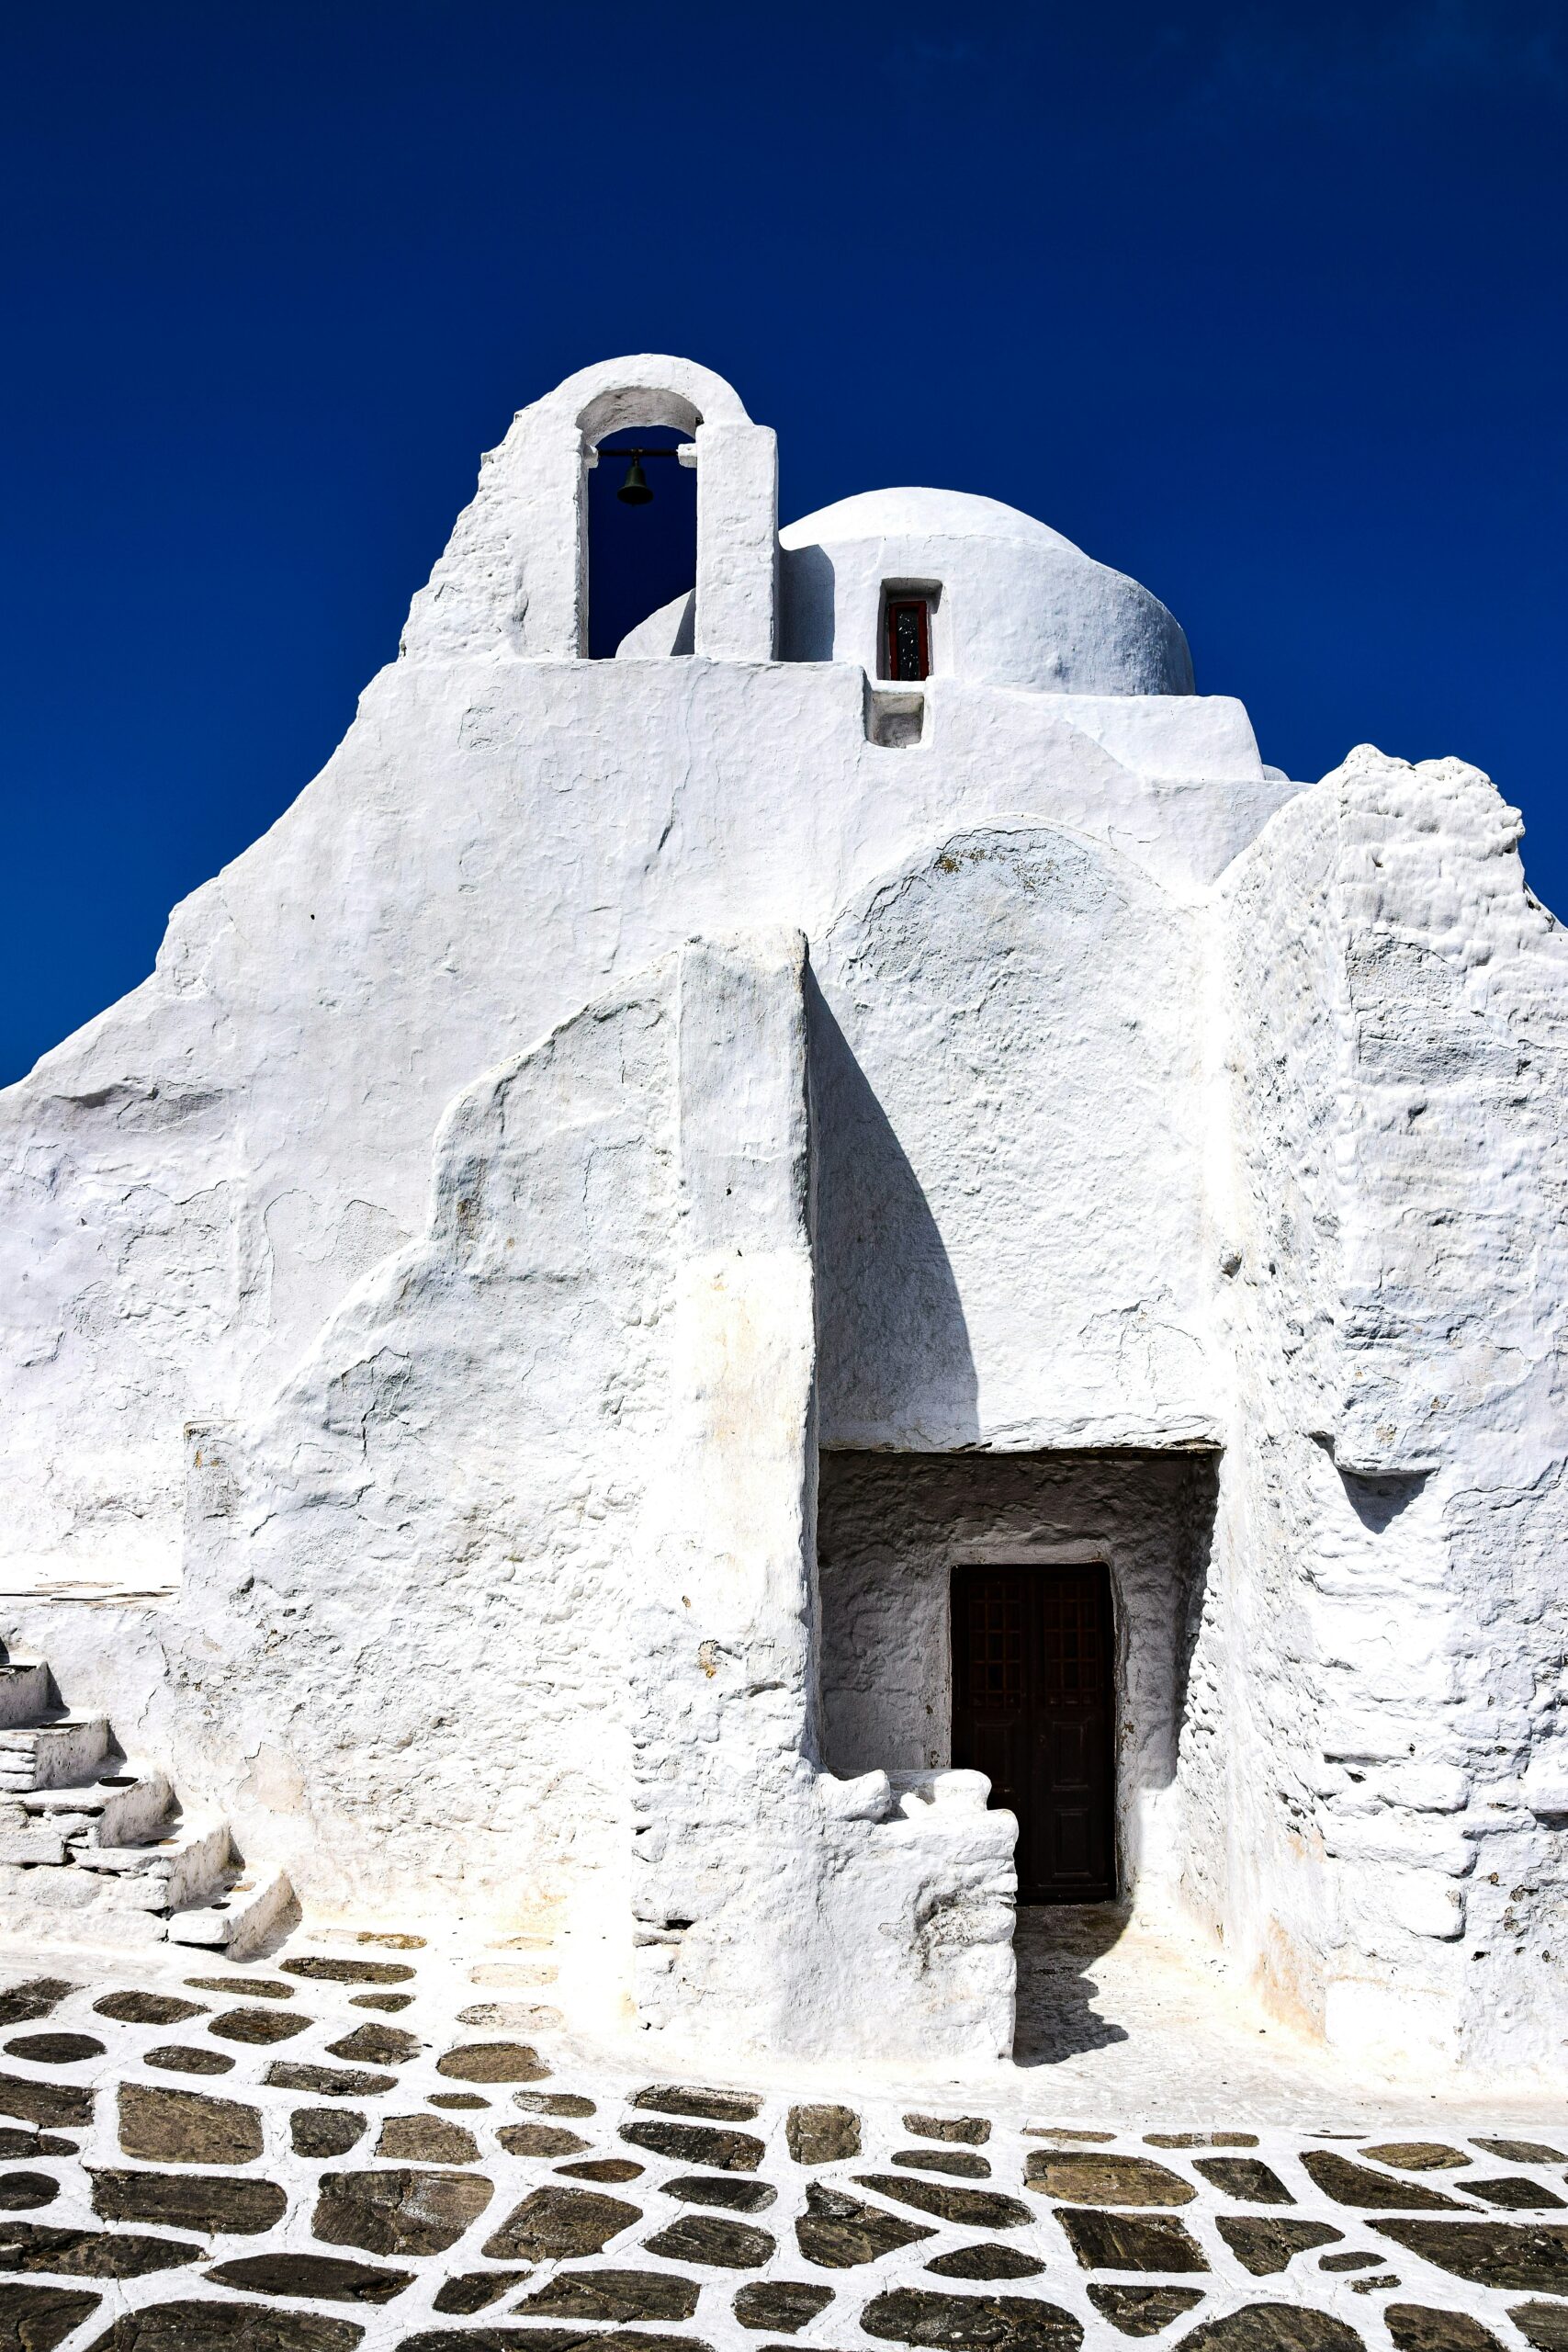 The iconic Paraportiani Church in Mykonos, Greece, stands proudly against a clear blue sky. Its striking white walls, characteristic of Cycladic architecture, glow in the sunlight. The church's smooth curves and rounded domes, painted in a dazzling white, are accentuated by the contrasting dark wooden door and window frames. In the foreground, the traditional Greek patterned cobblestone path leads up to the entrance, inviting onlookers into this historic and serene sanctuary.